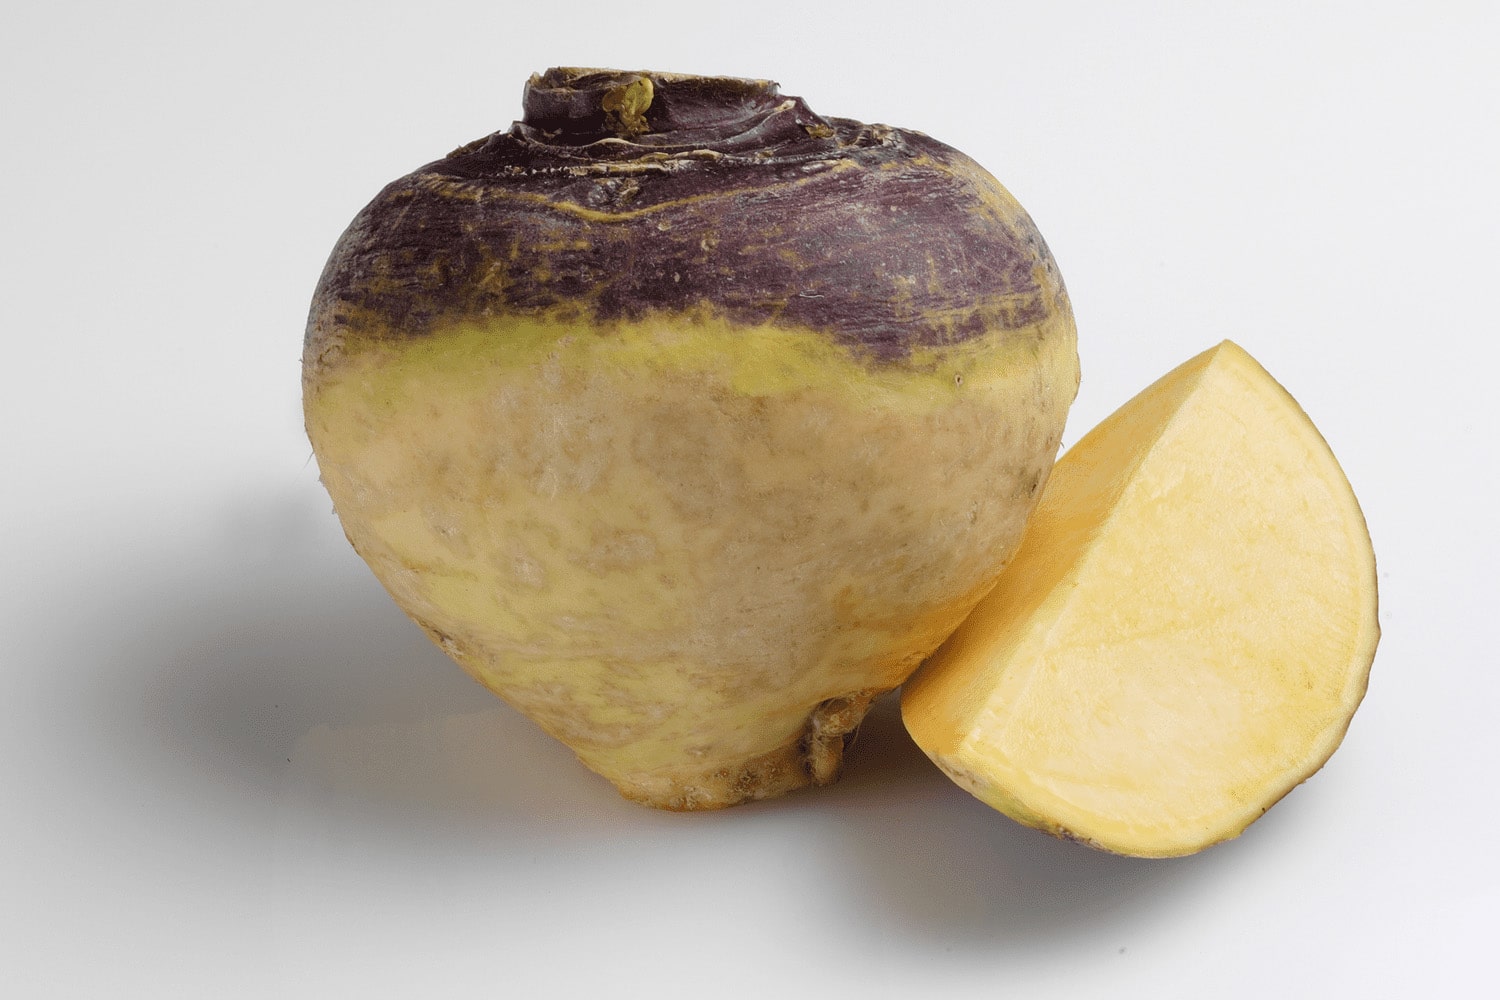 30 interesting facts about Rutabaga